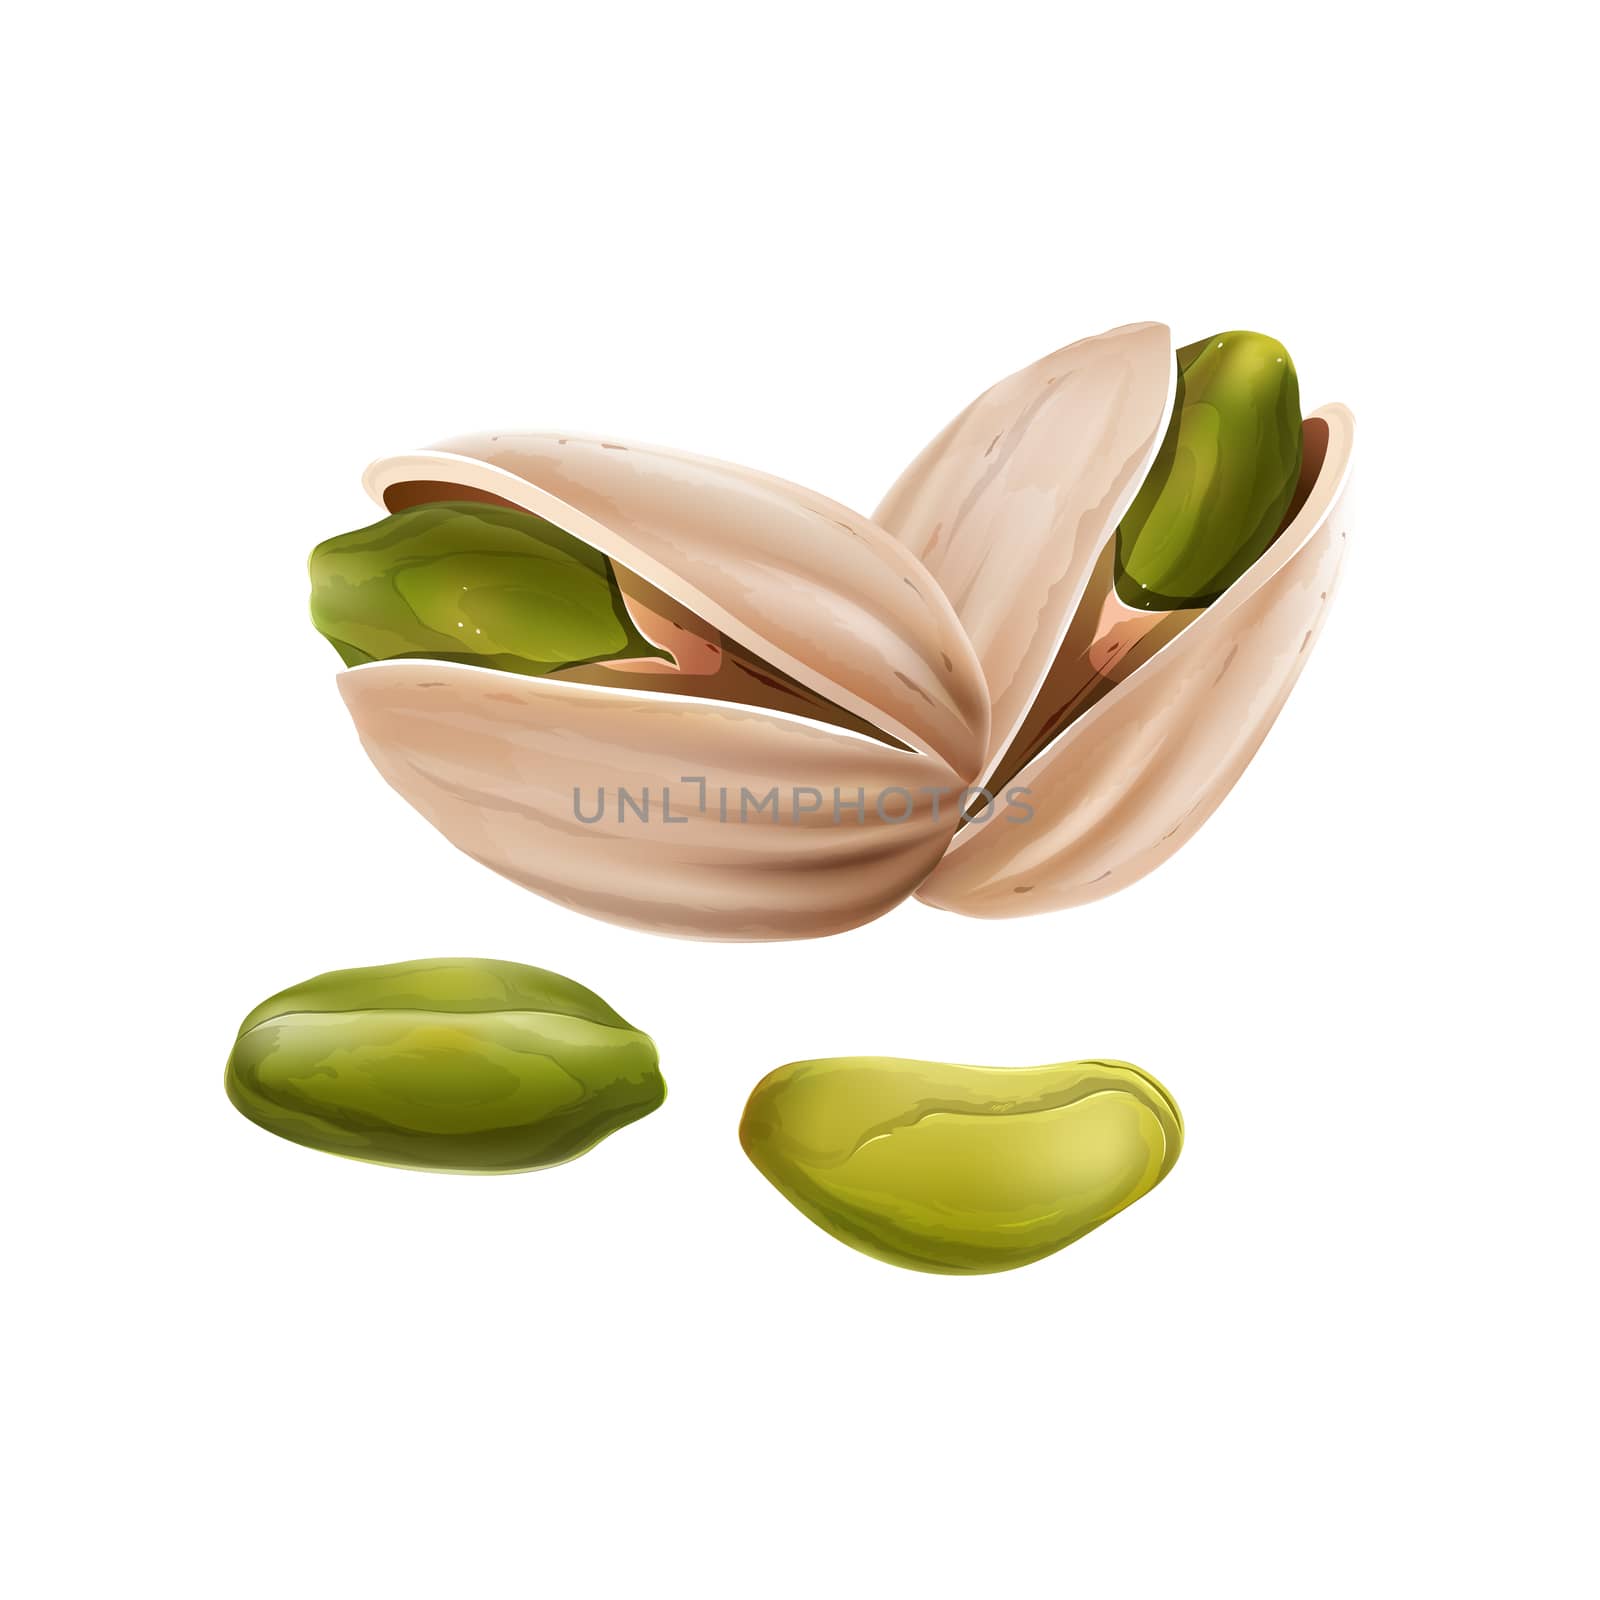 Pistachio nuts on white background by ConceptCafe